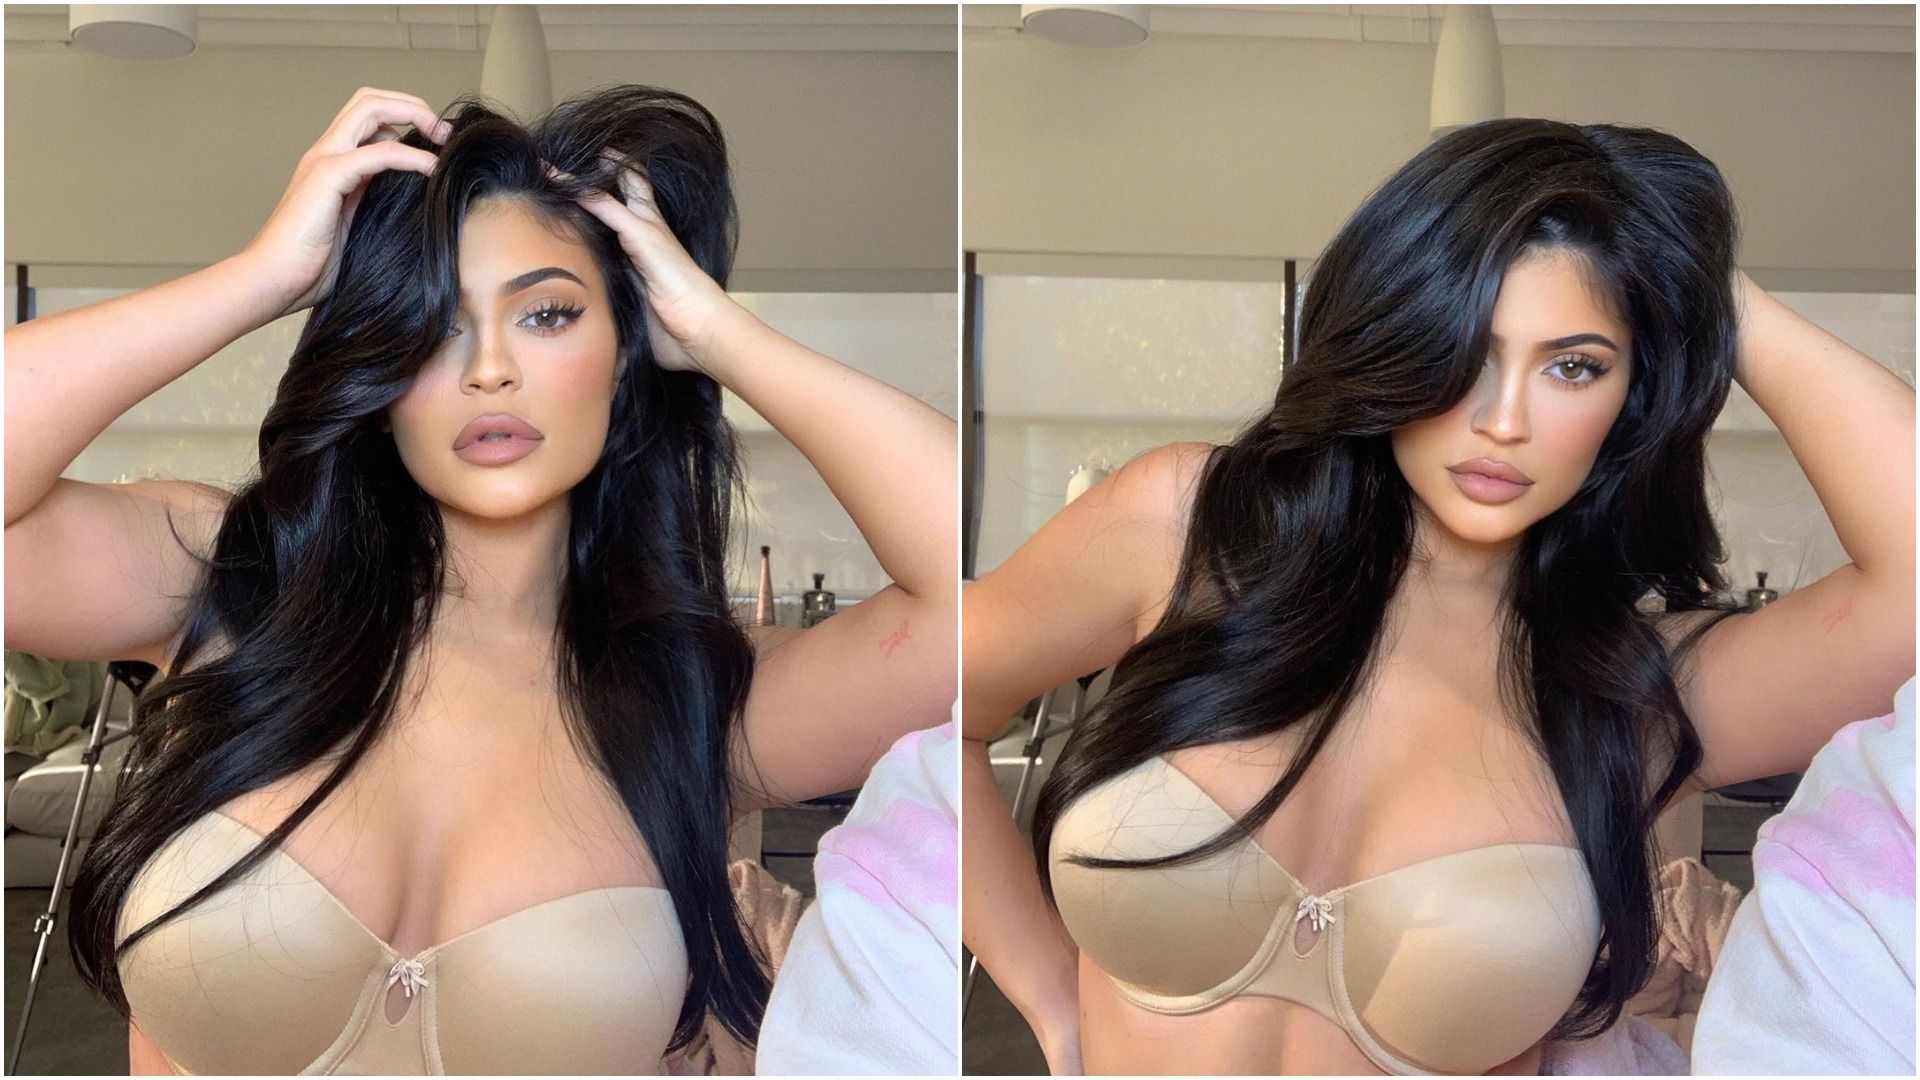 Erotic stories kylie jenner